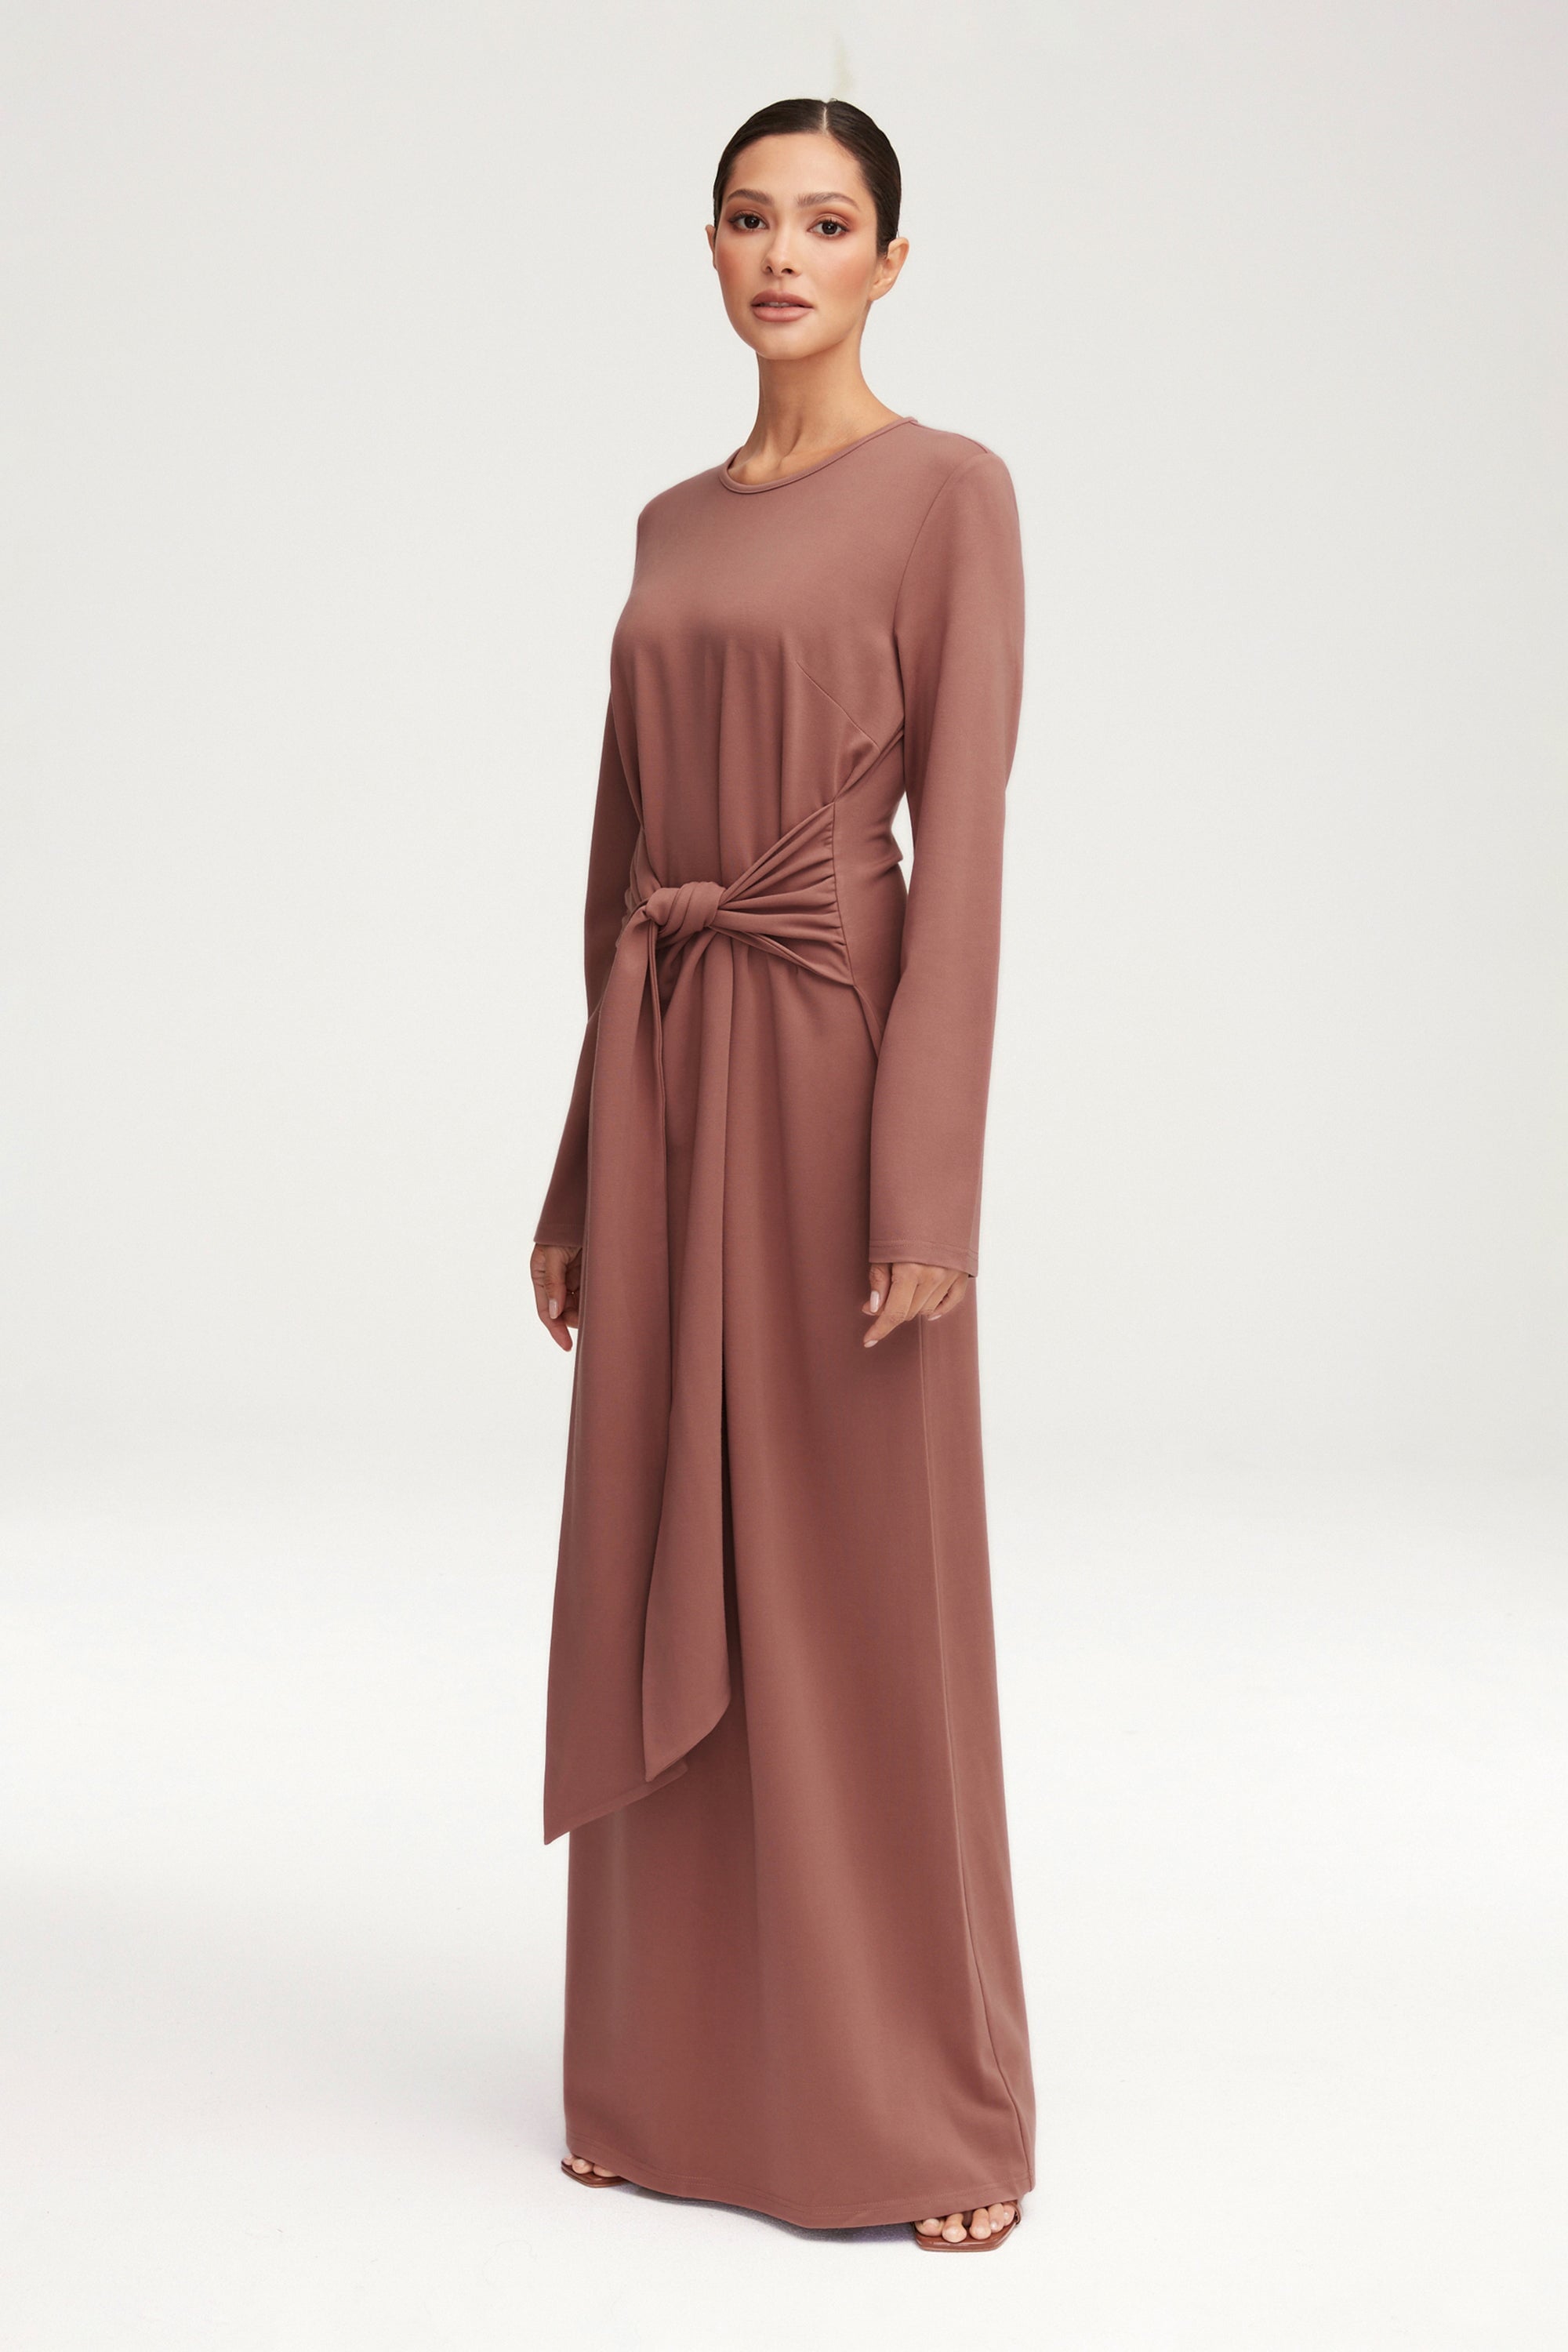 Jersey Tie Front Maxi Dress - Blush Nude Clothing epschoolboard 